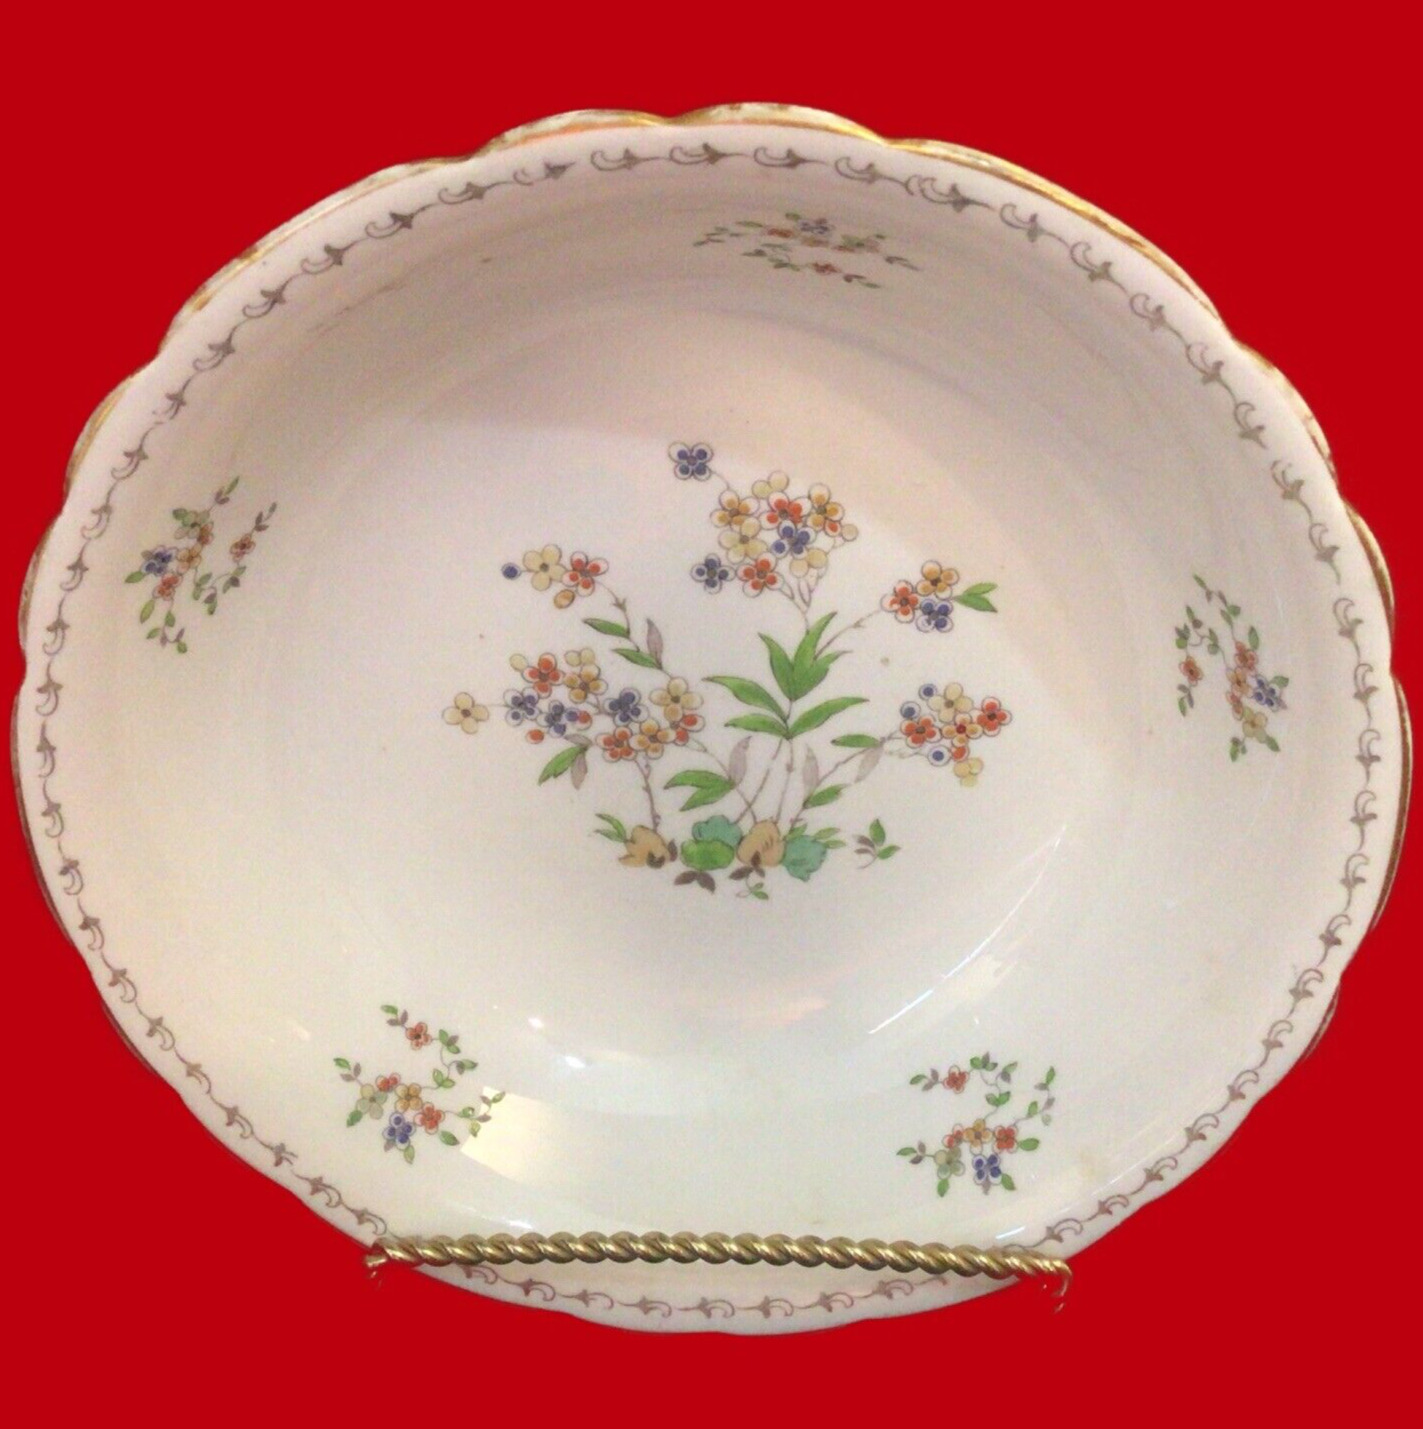 ROYAL TUSCAN BOWL RAISED FLORAL PATTERN TUSCAN CHINA ENGLAND ANTIQUE GOLD ACCENT